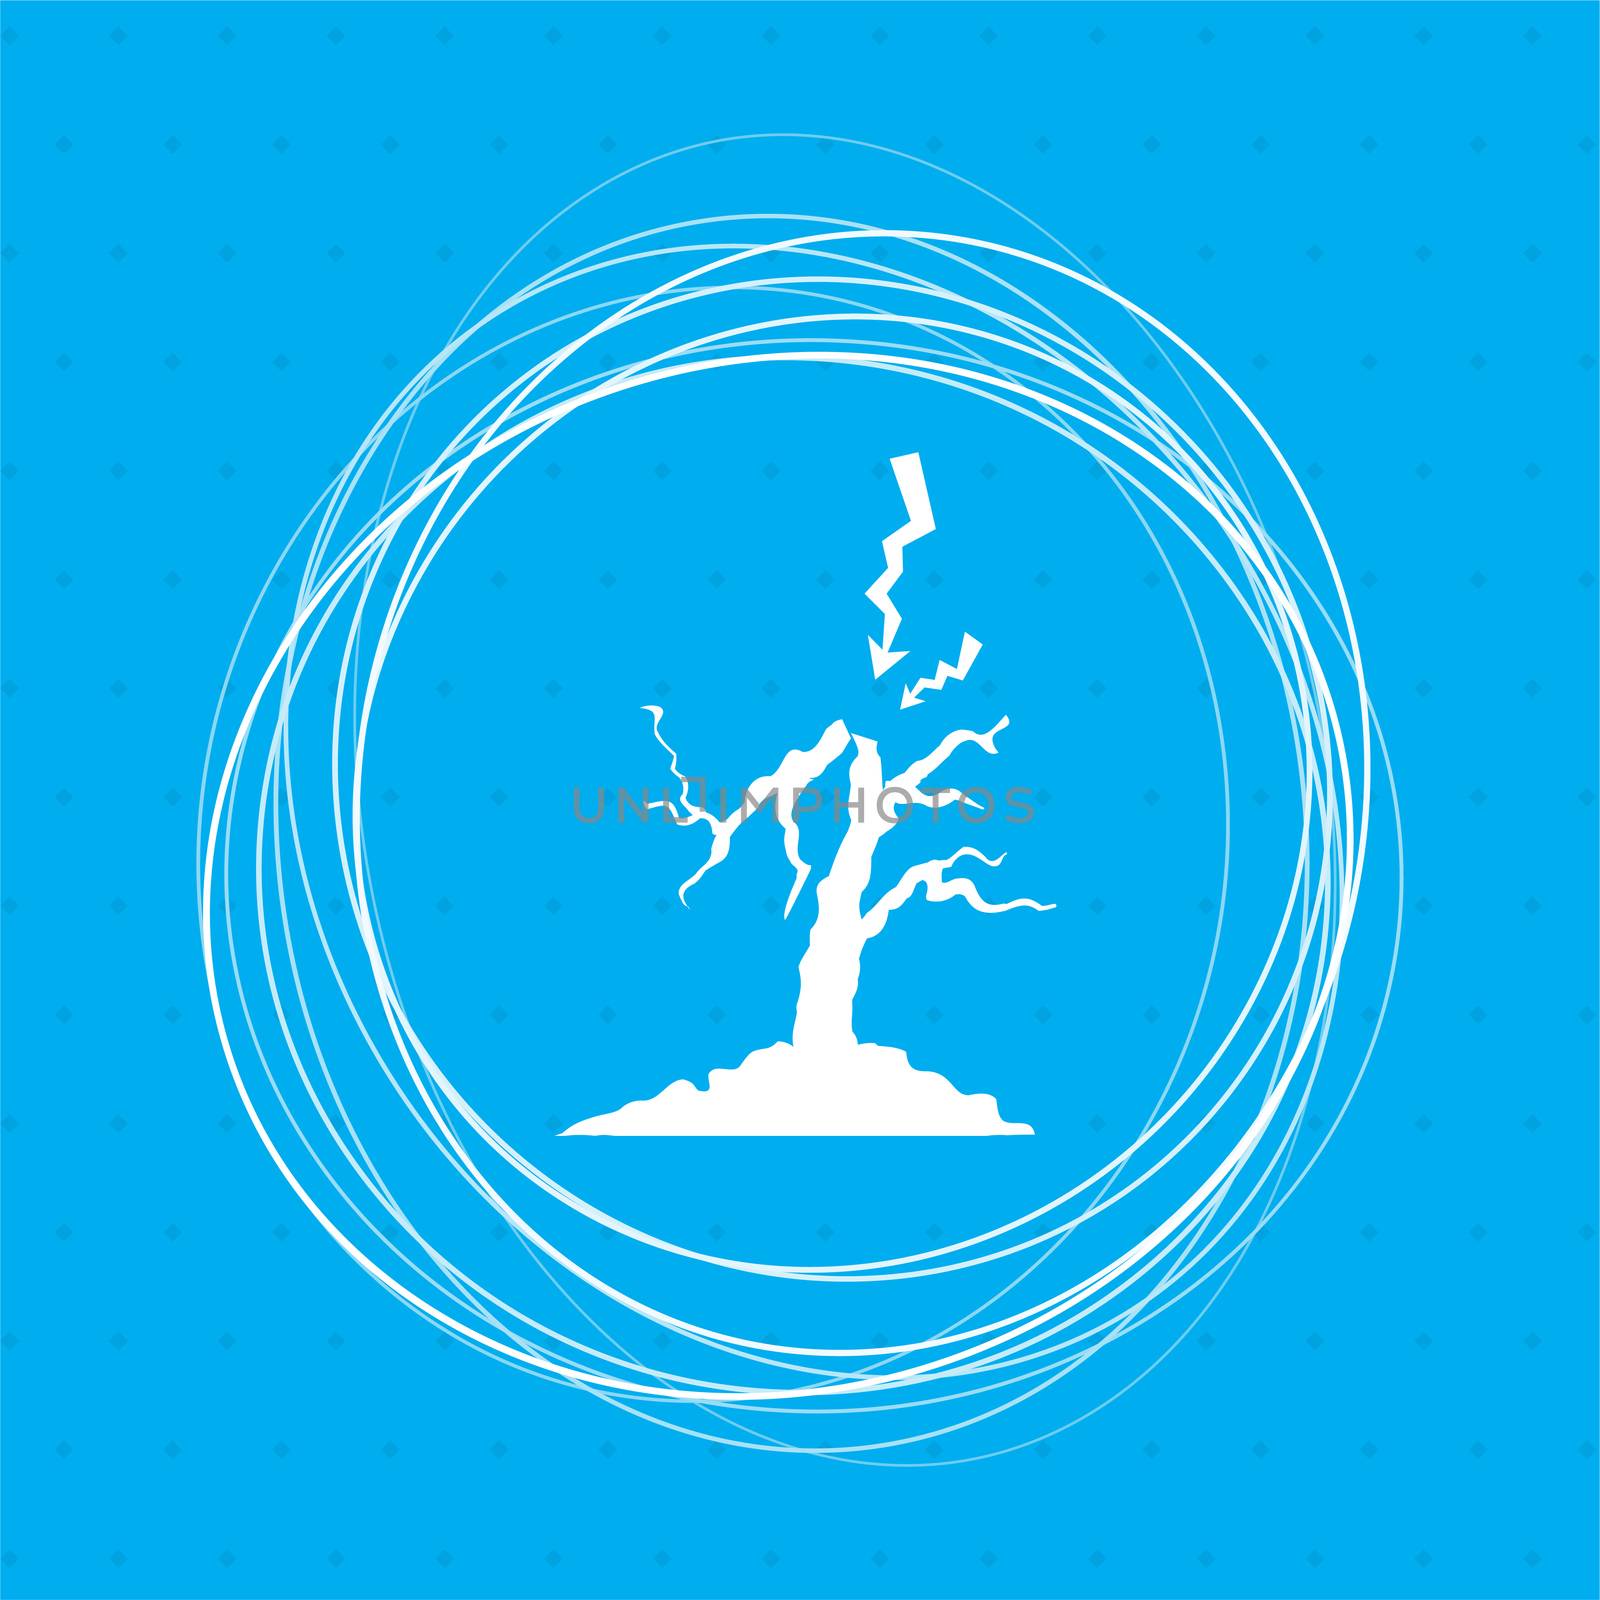 lightning and tree icon on a blue background with abstract circles around and place for your text. illustration